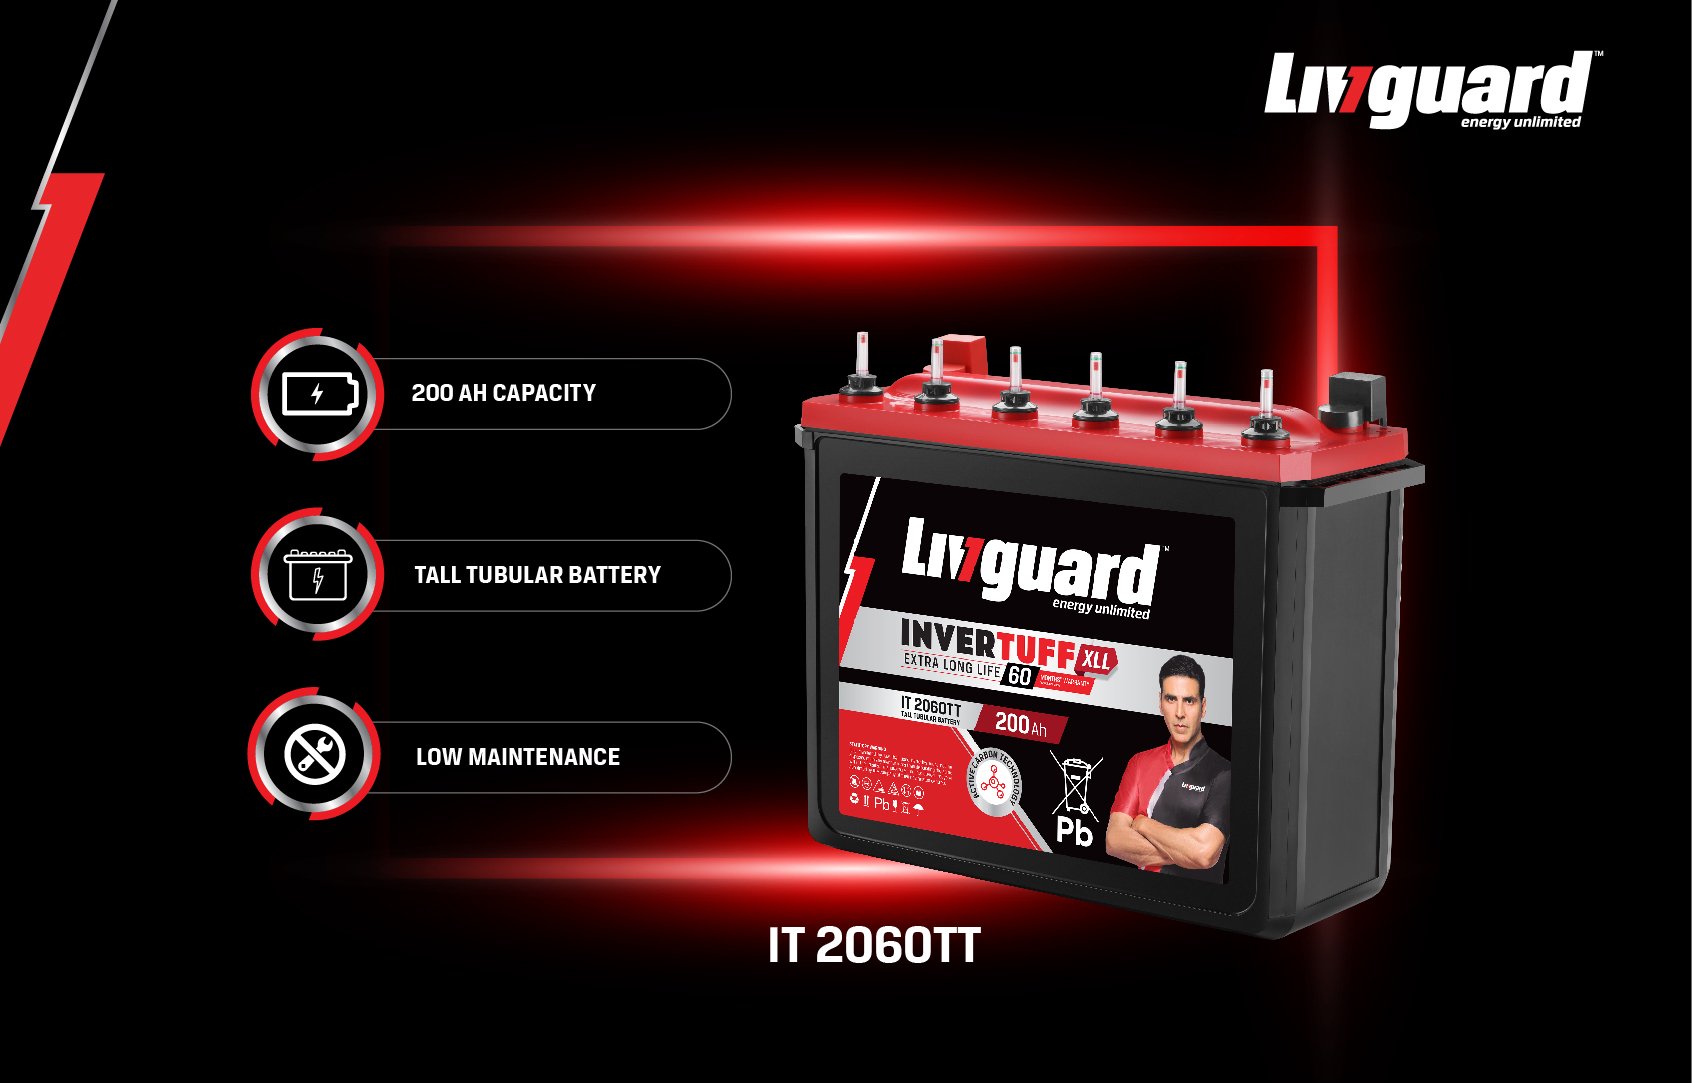 Exciting Livguard Offers: Buy Inverters, Batteries, and More at Unbeatable  Prices!